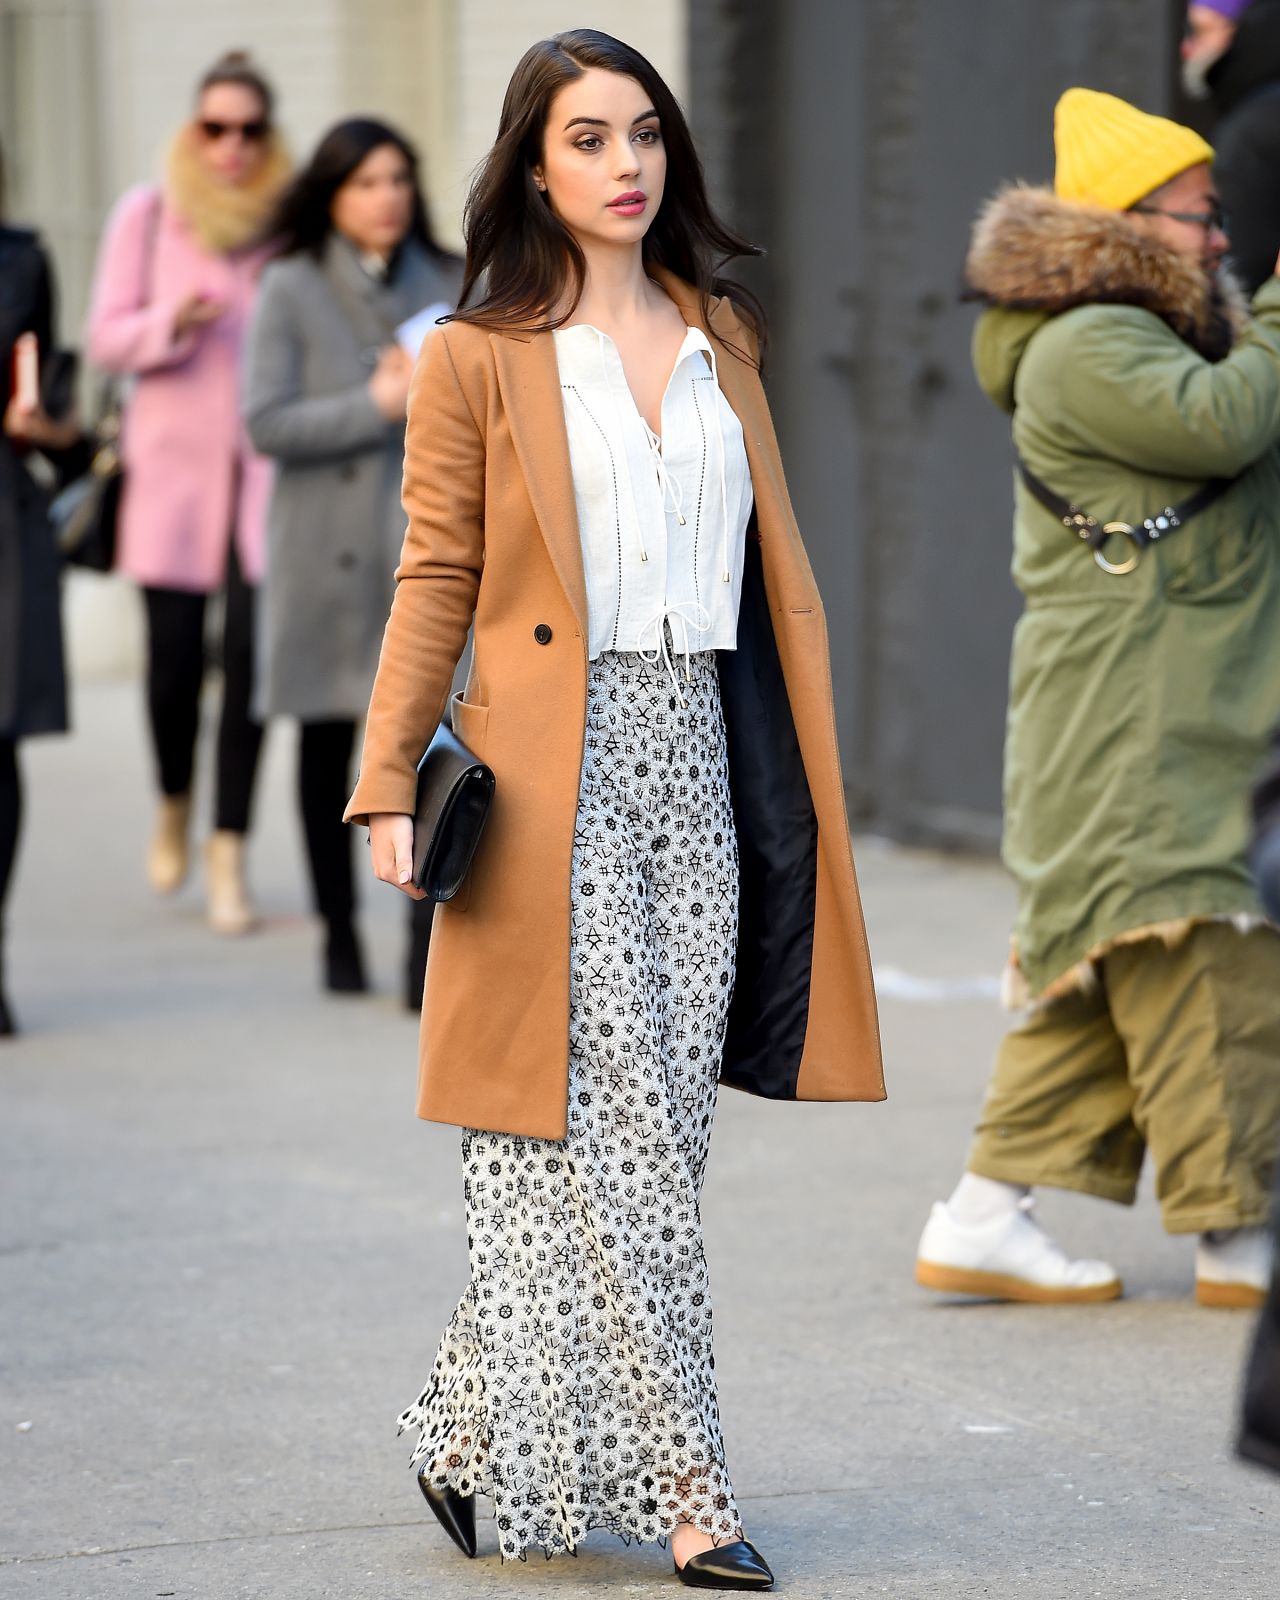 When Love begins with a white lie.  Adelaide-kane-casual-style-out-in-new-york-city-2-12-2016-3